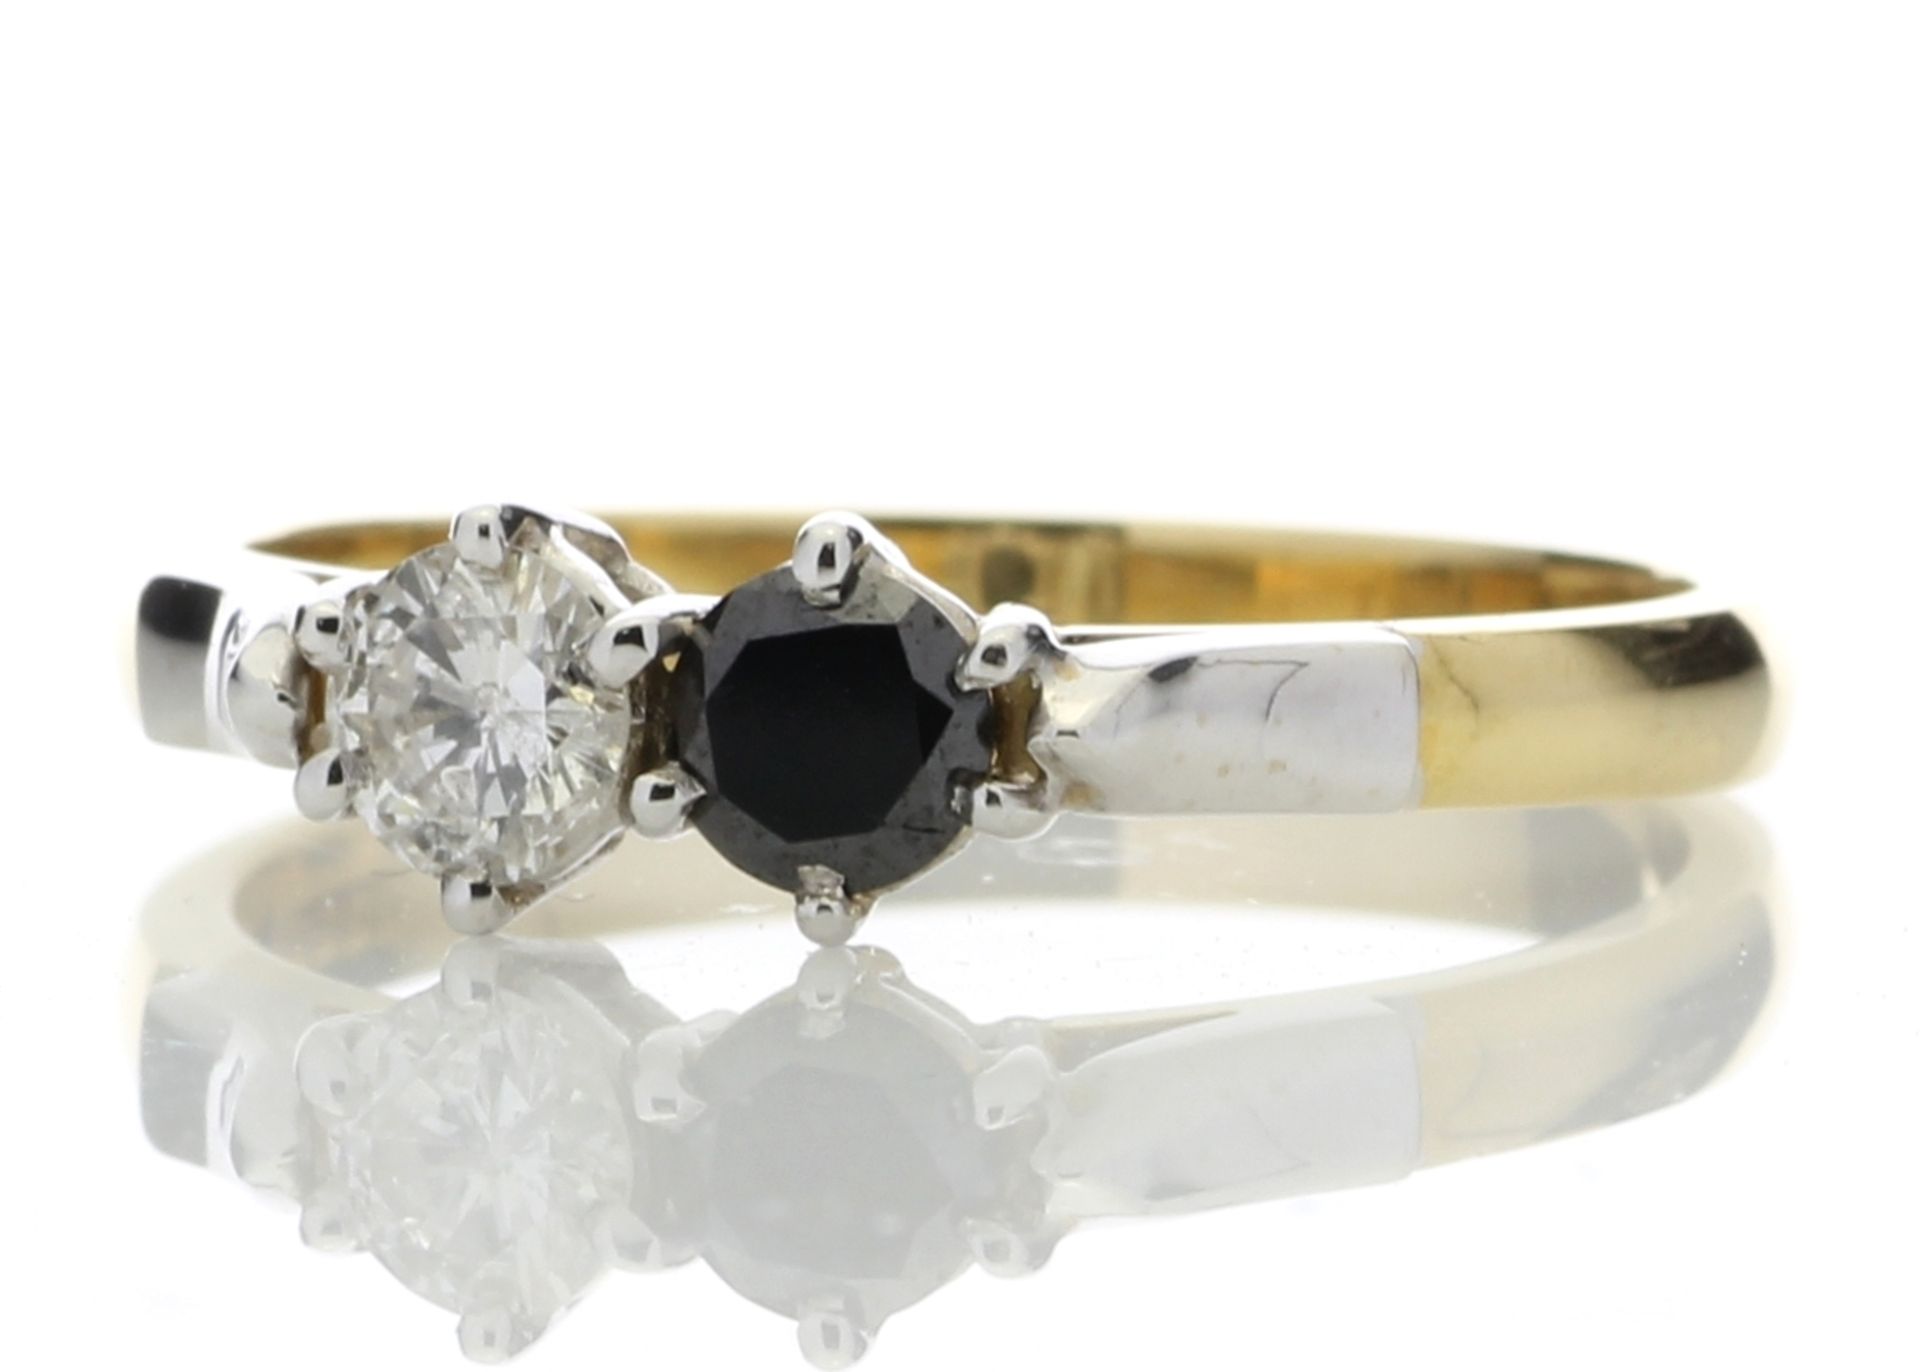 18ct Two Stone Claw Set Diamond With Black Treated Stone Ring 0.50 Carats - Valued by AGI £2,080. - Image 2 of 4